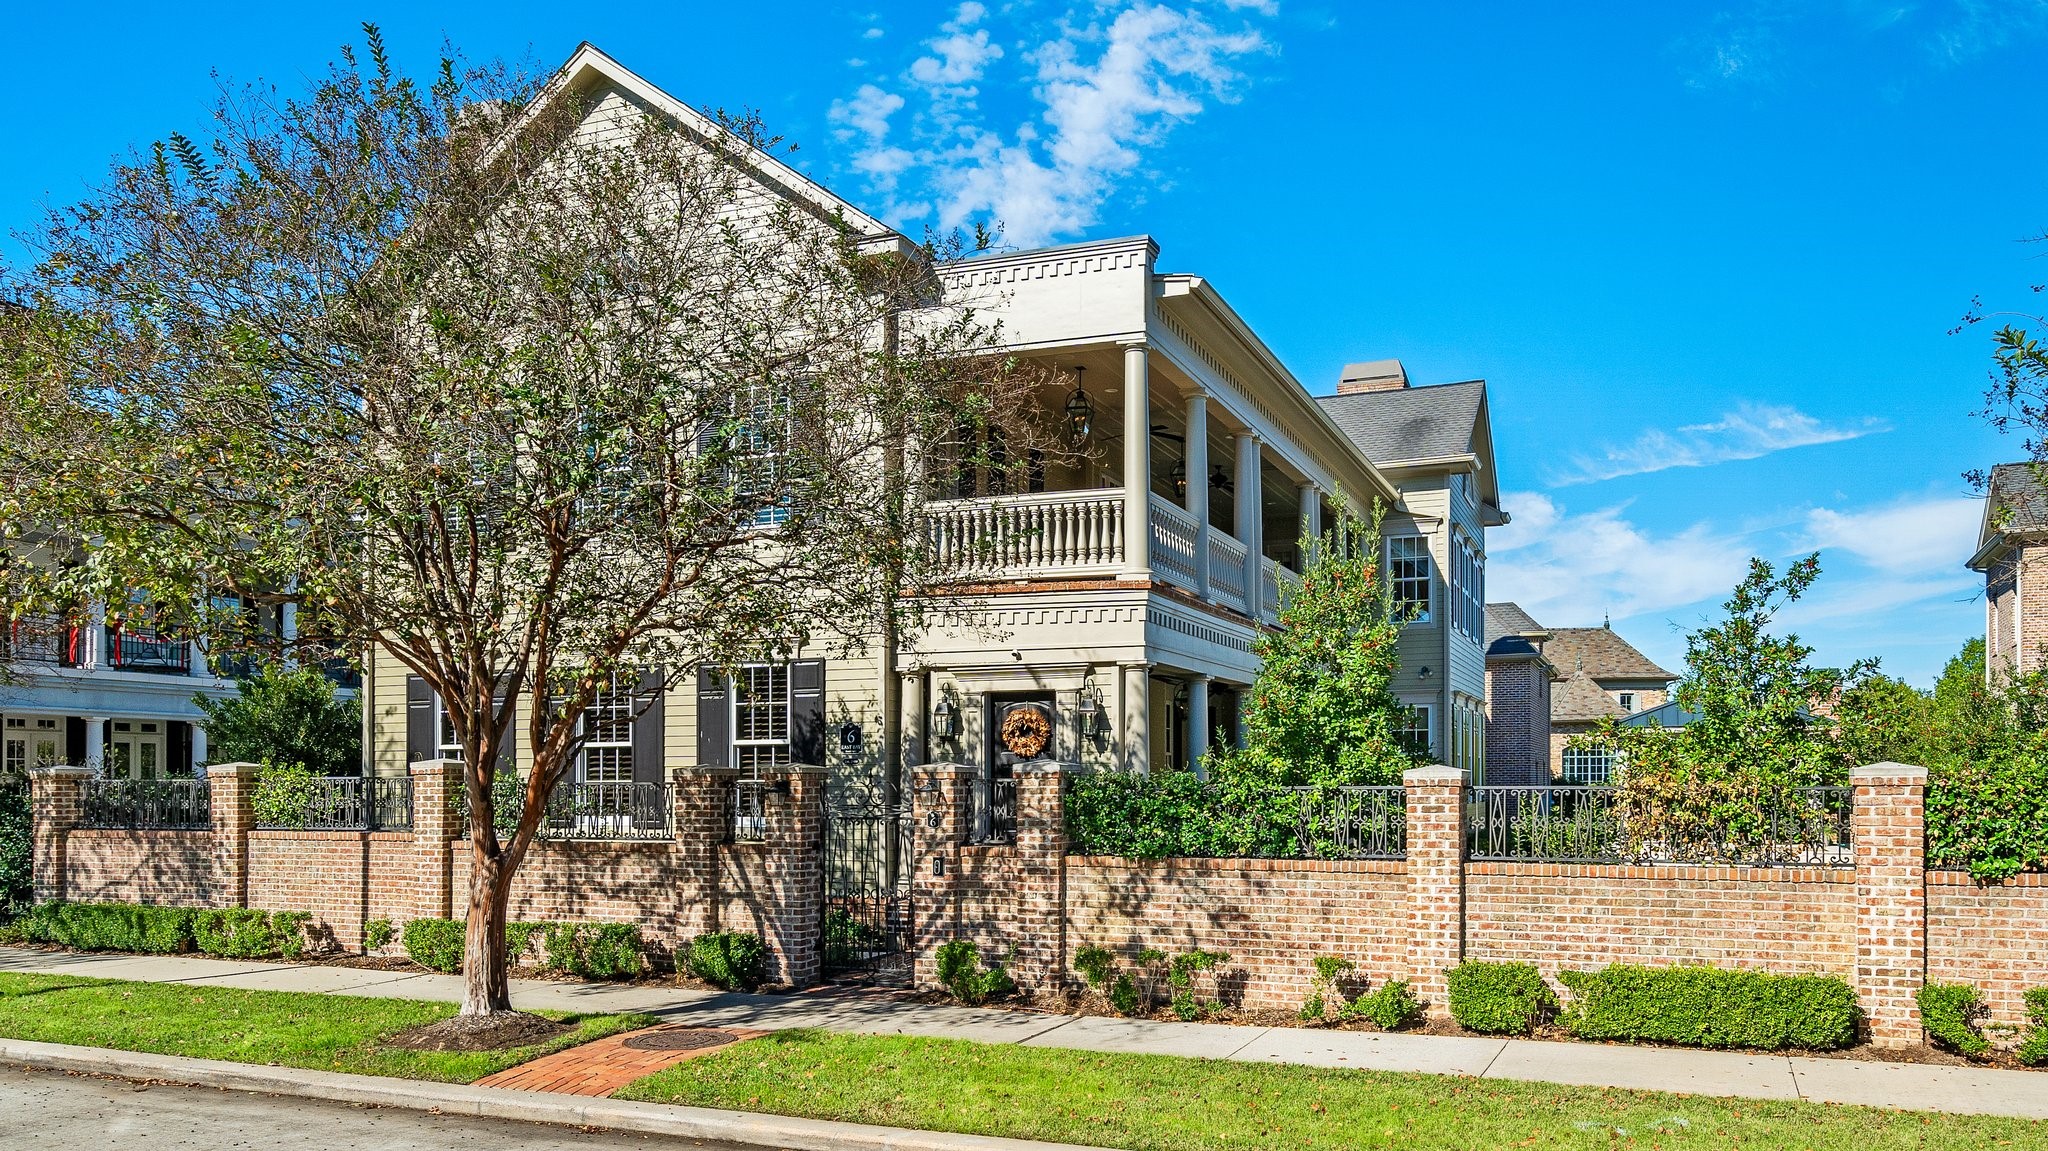 Dreams do come true in this gorgeous home on East Shore!  Reminiscent of Charleston, this stately home with oversized front porch and balcony is all about location, and East Shore is where it is at in The Woodlands!